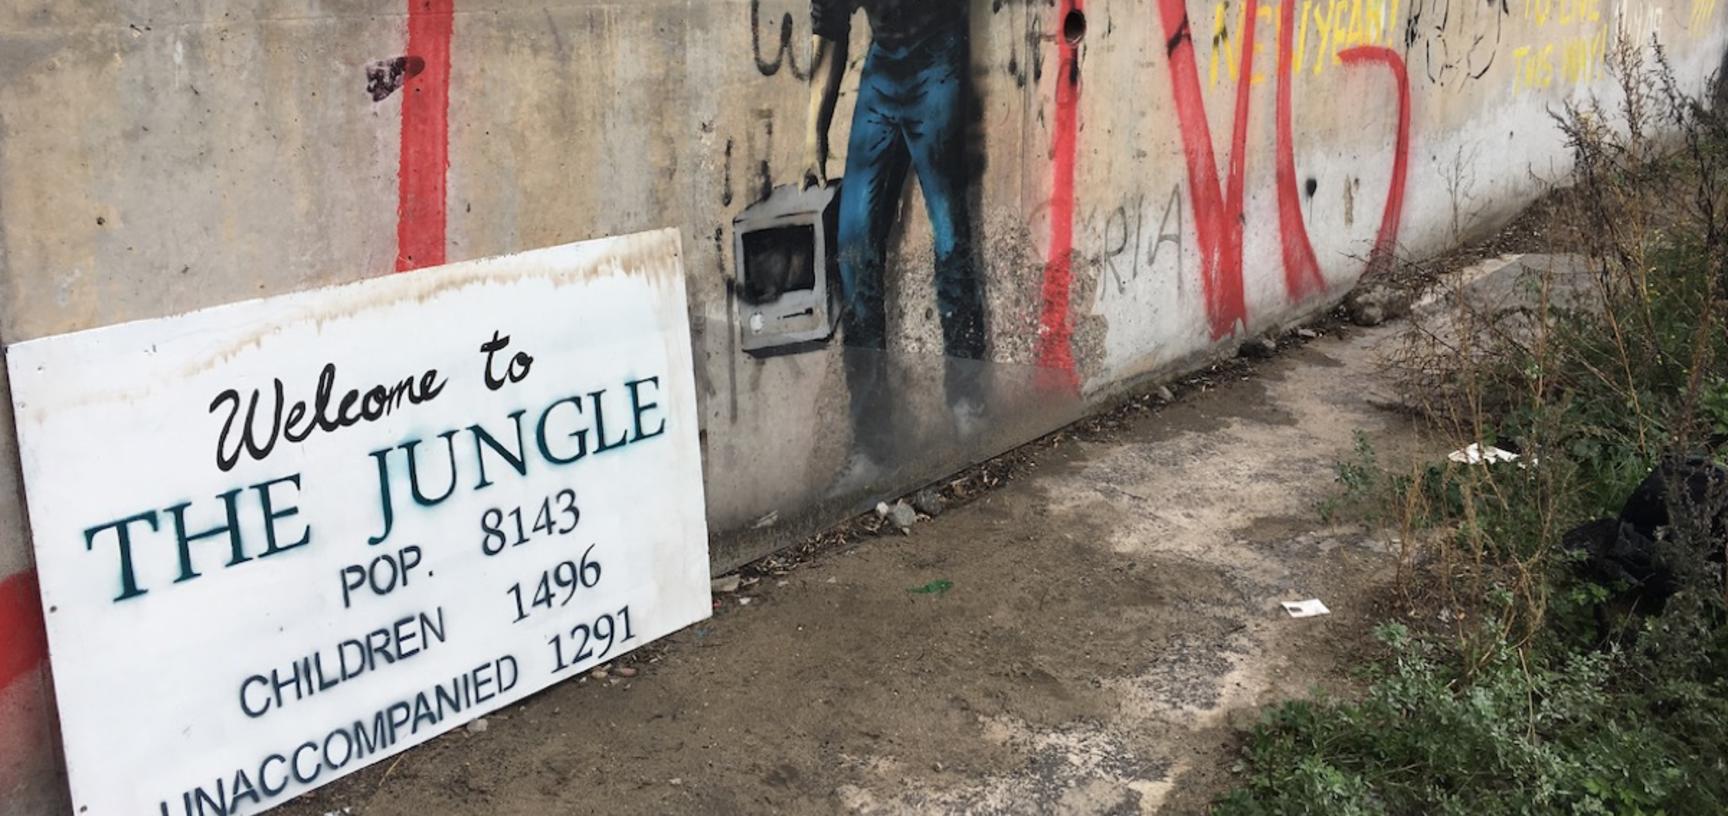 Wall with graffiti and a sign on the floor: Welcome to the Jungle. Pop: 8143, Children: 1496; unaccompanied: 1291.